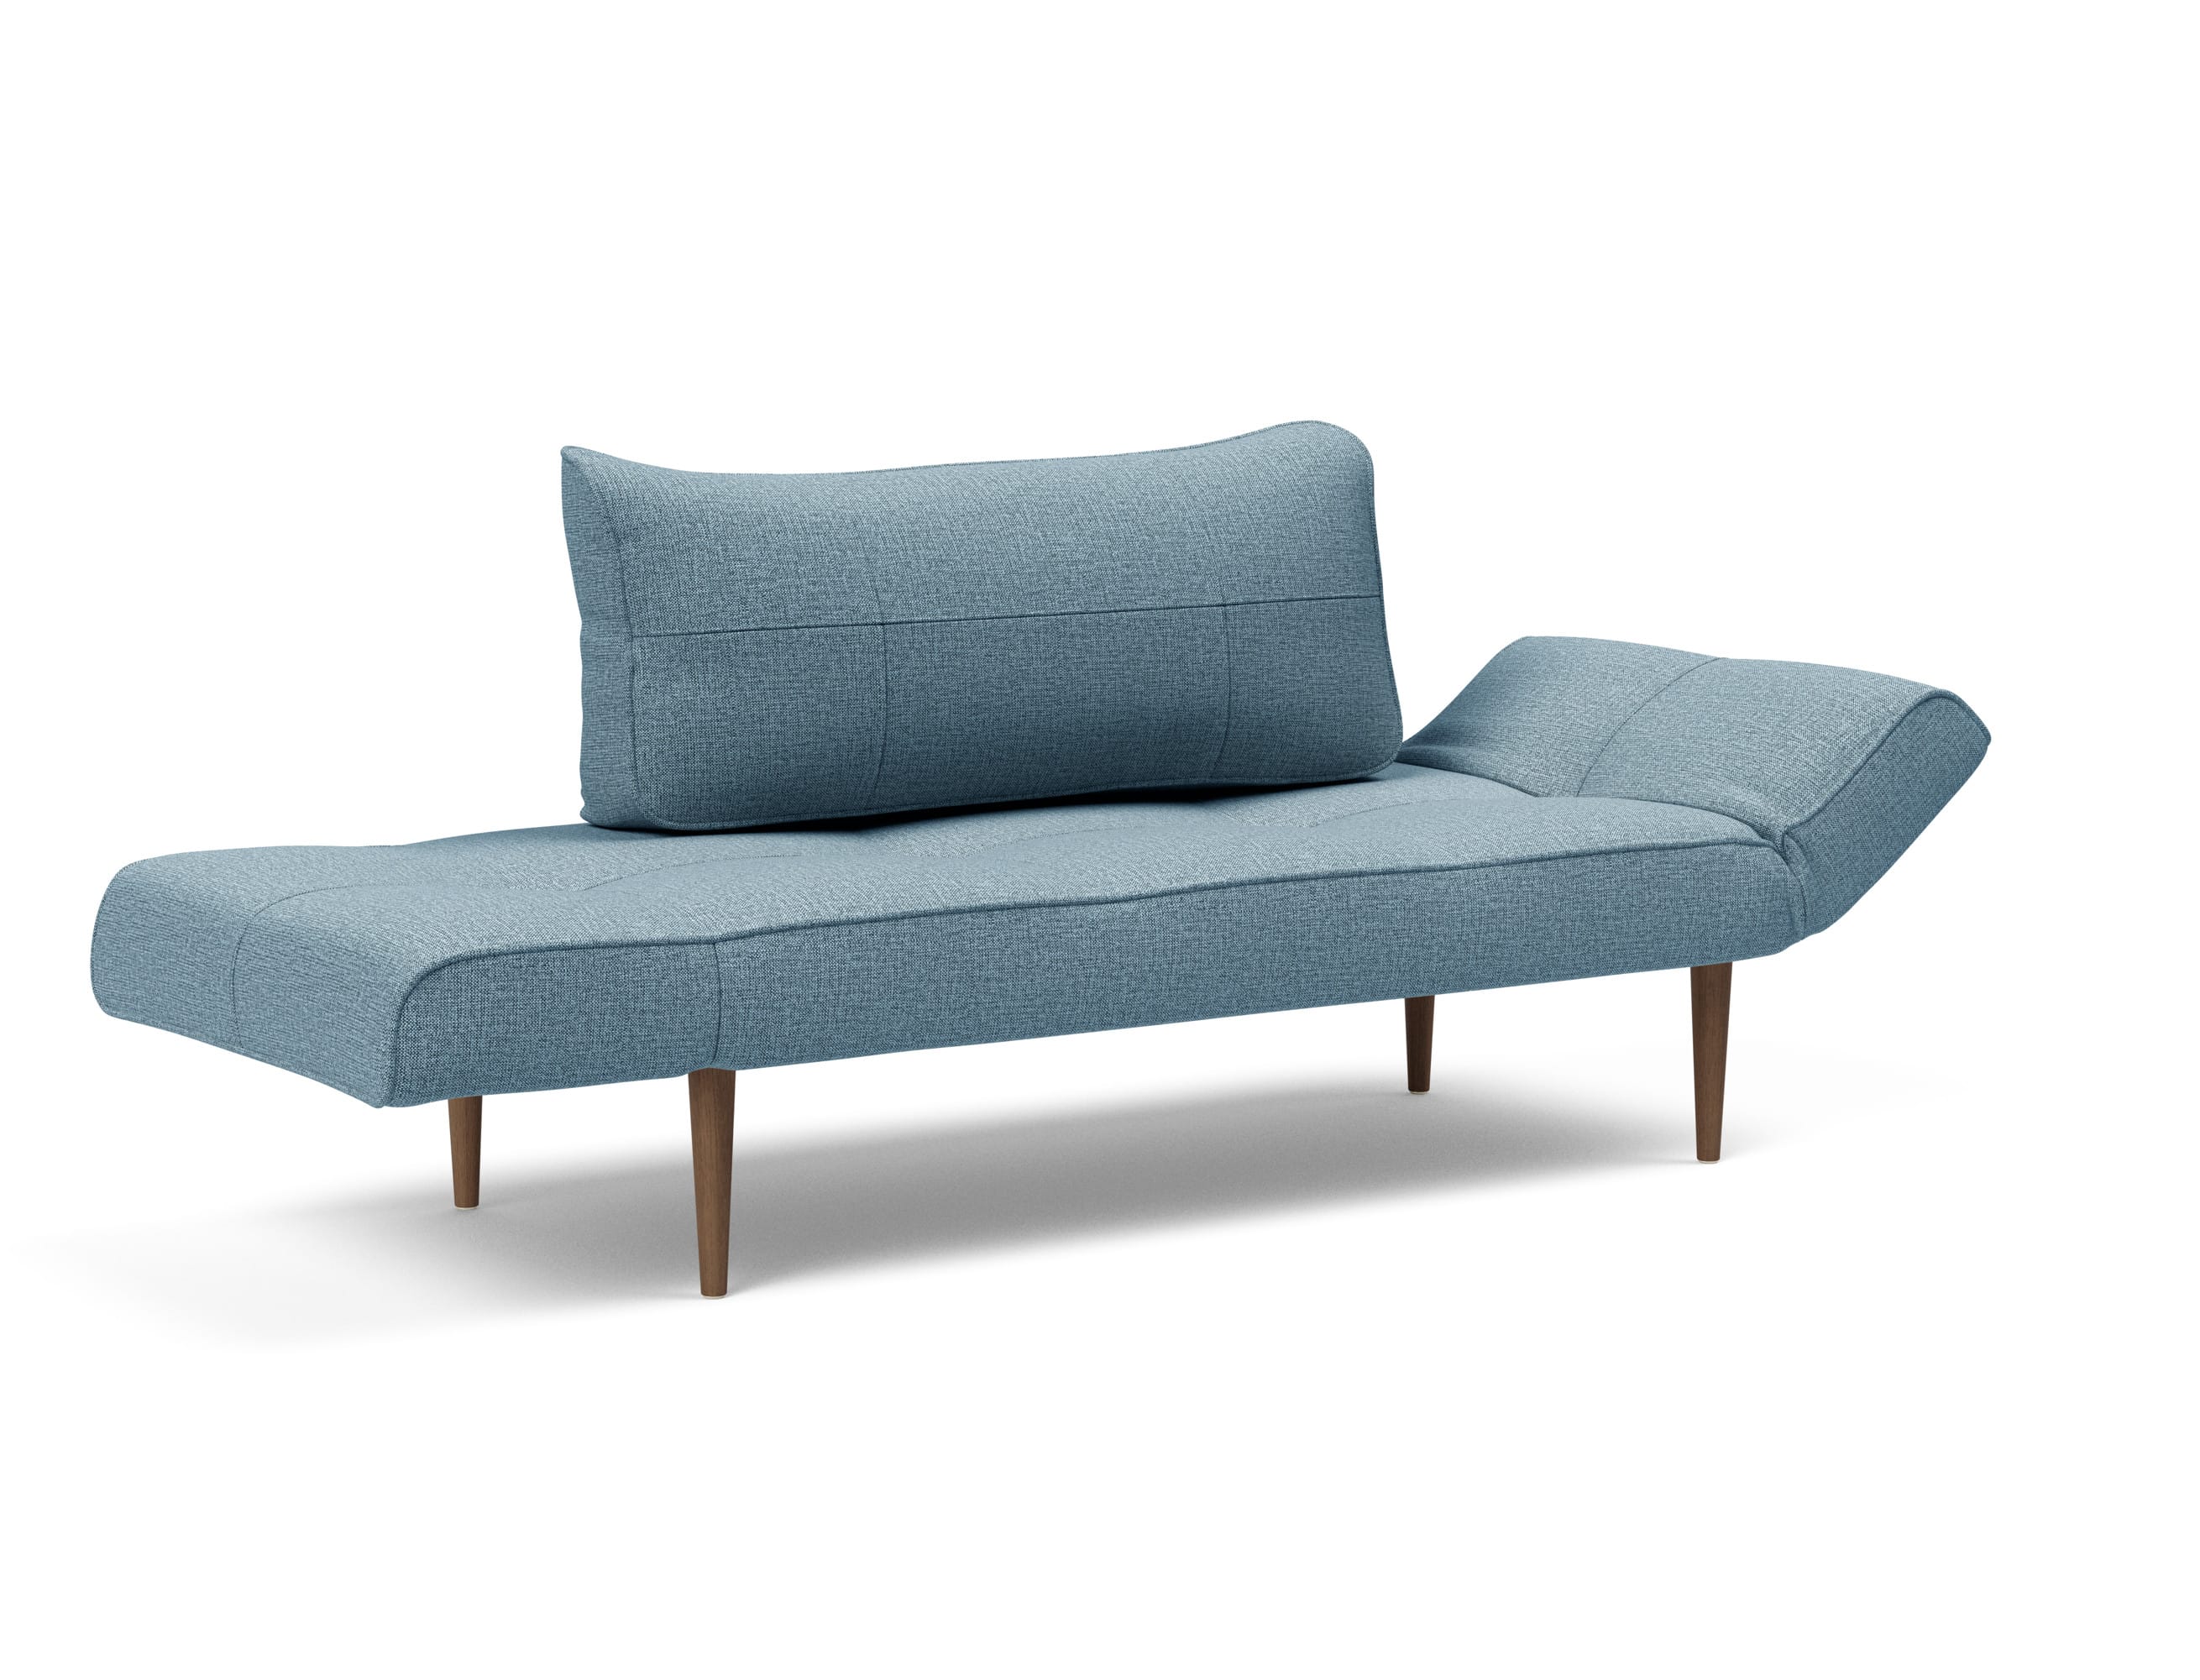 by Zeal Deluxe Daybed Blue Sofa Light Innovation Bed Dance Mixed